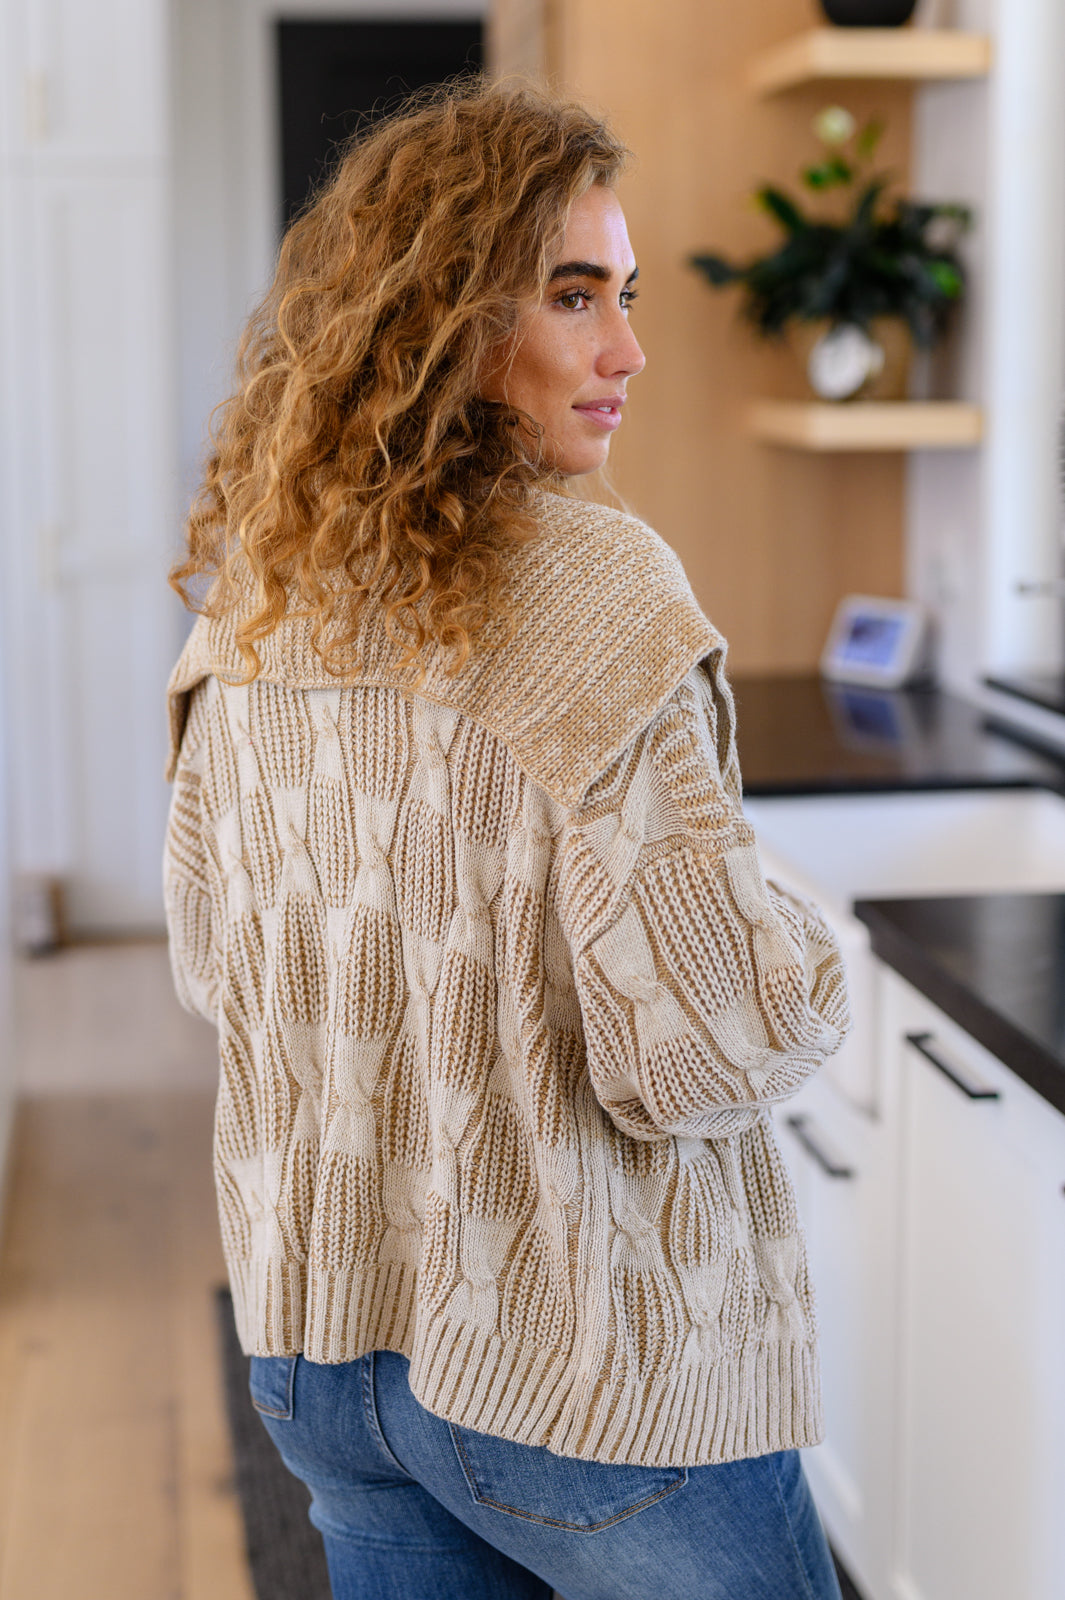 Its cable knit checkered pattern creates an eye-catching design, while its ribbed shawl collar and open front make this cardigan perfect for those cooler evenings